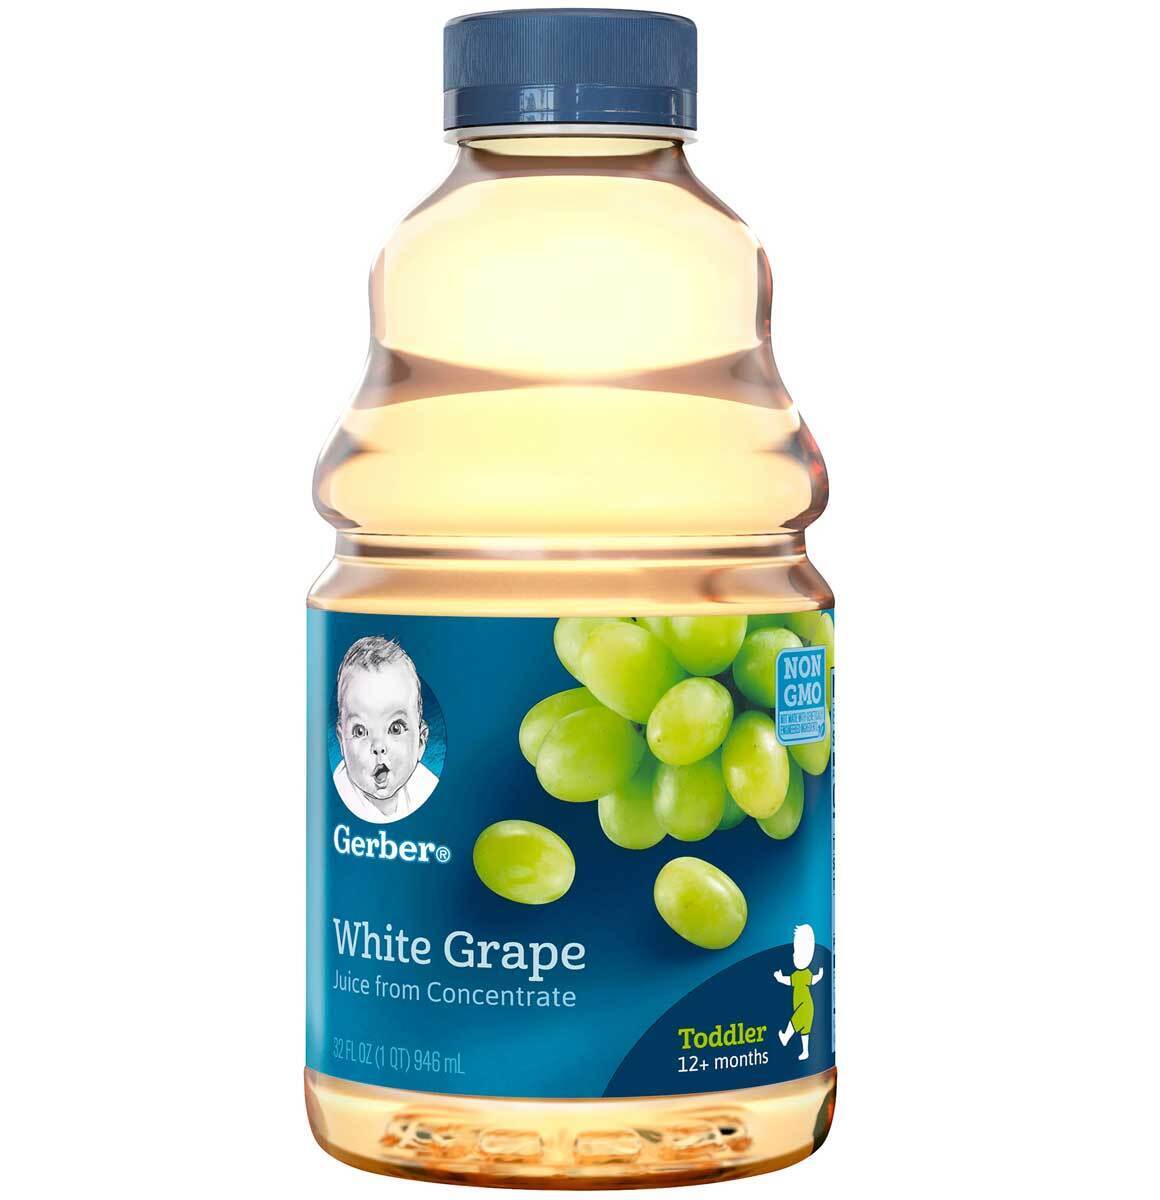 Gerber White Grape Juice From Concentrate 12+ Months Non GMO - 32 Oz - Pack of 2 Gerber Does not apply